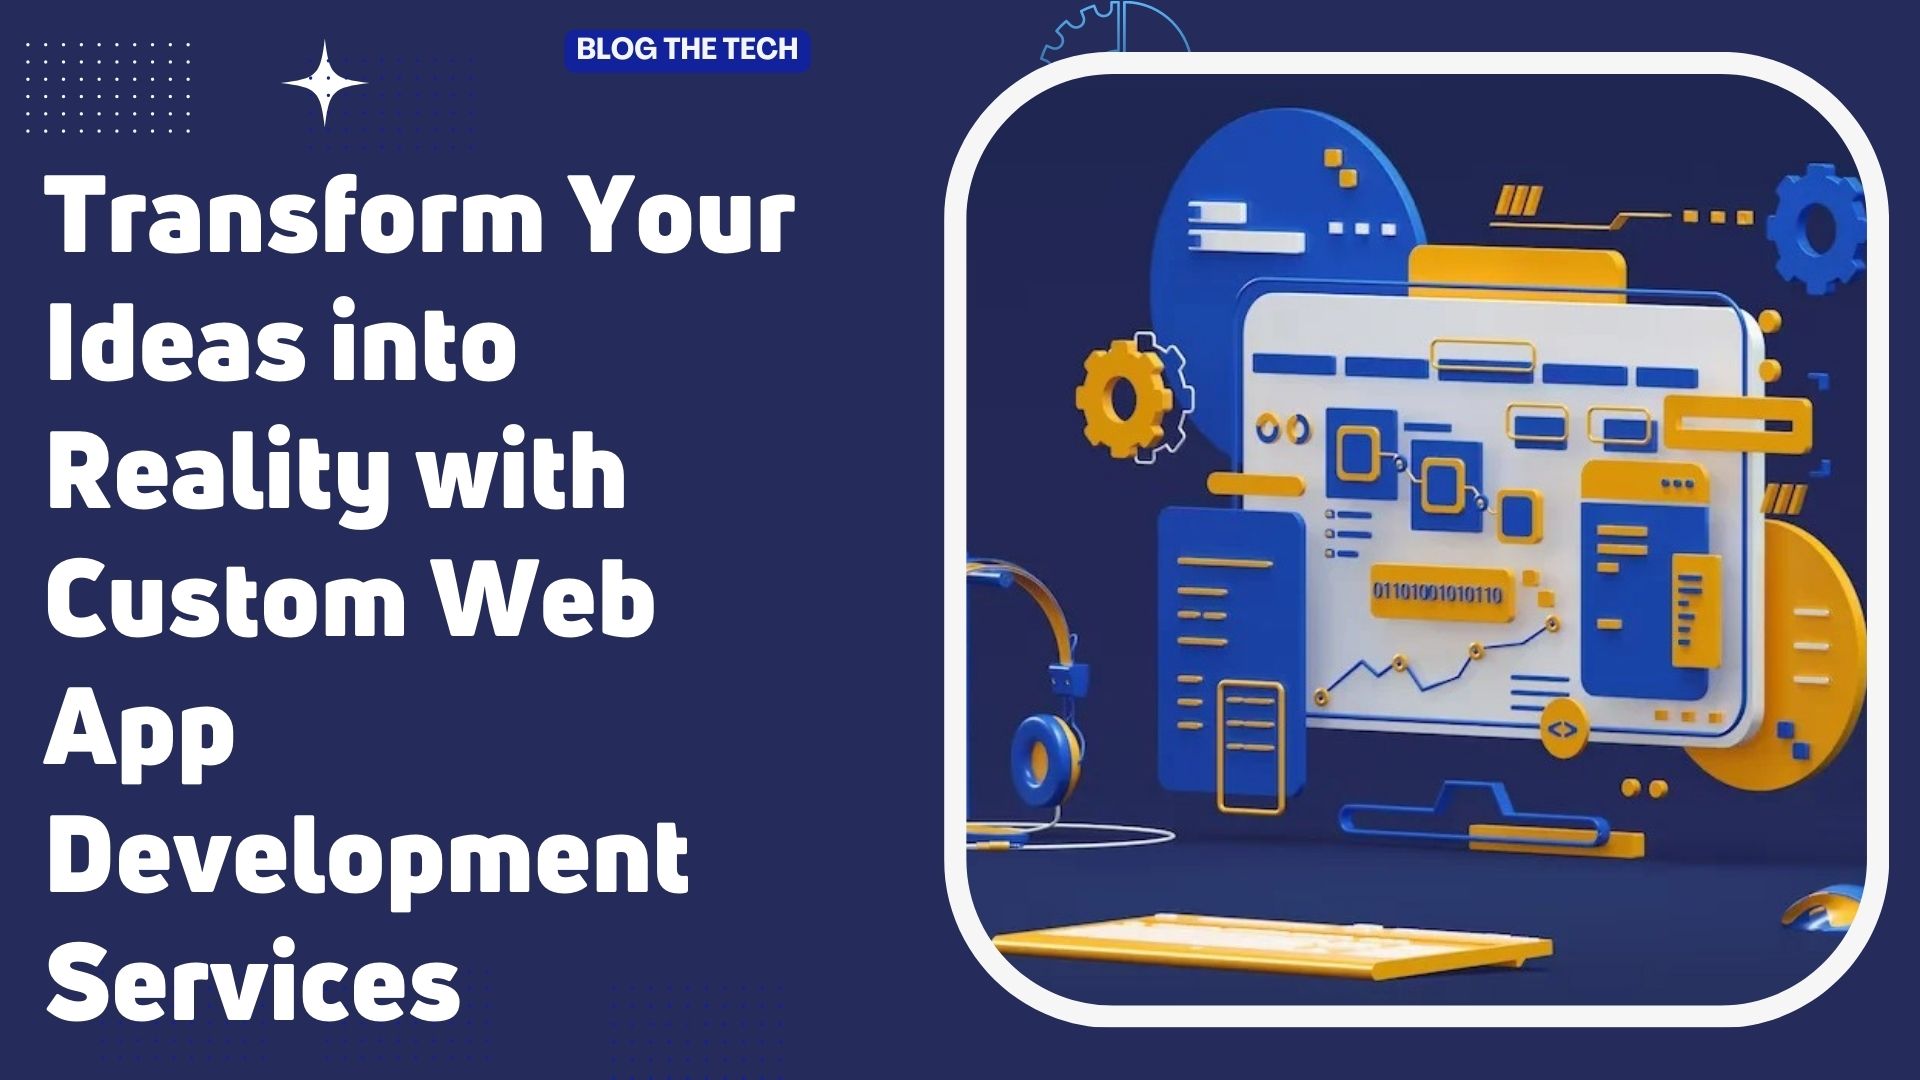 Transform Your Ideas into Reality with Custom Web App Development Services